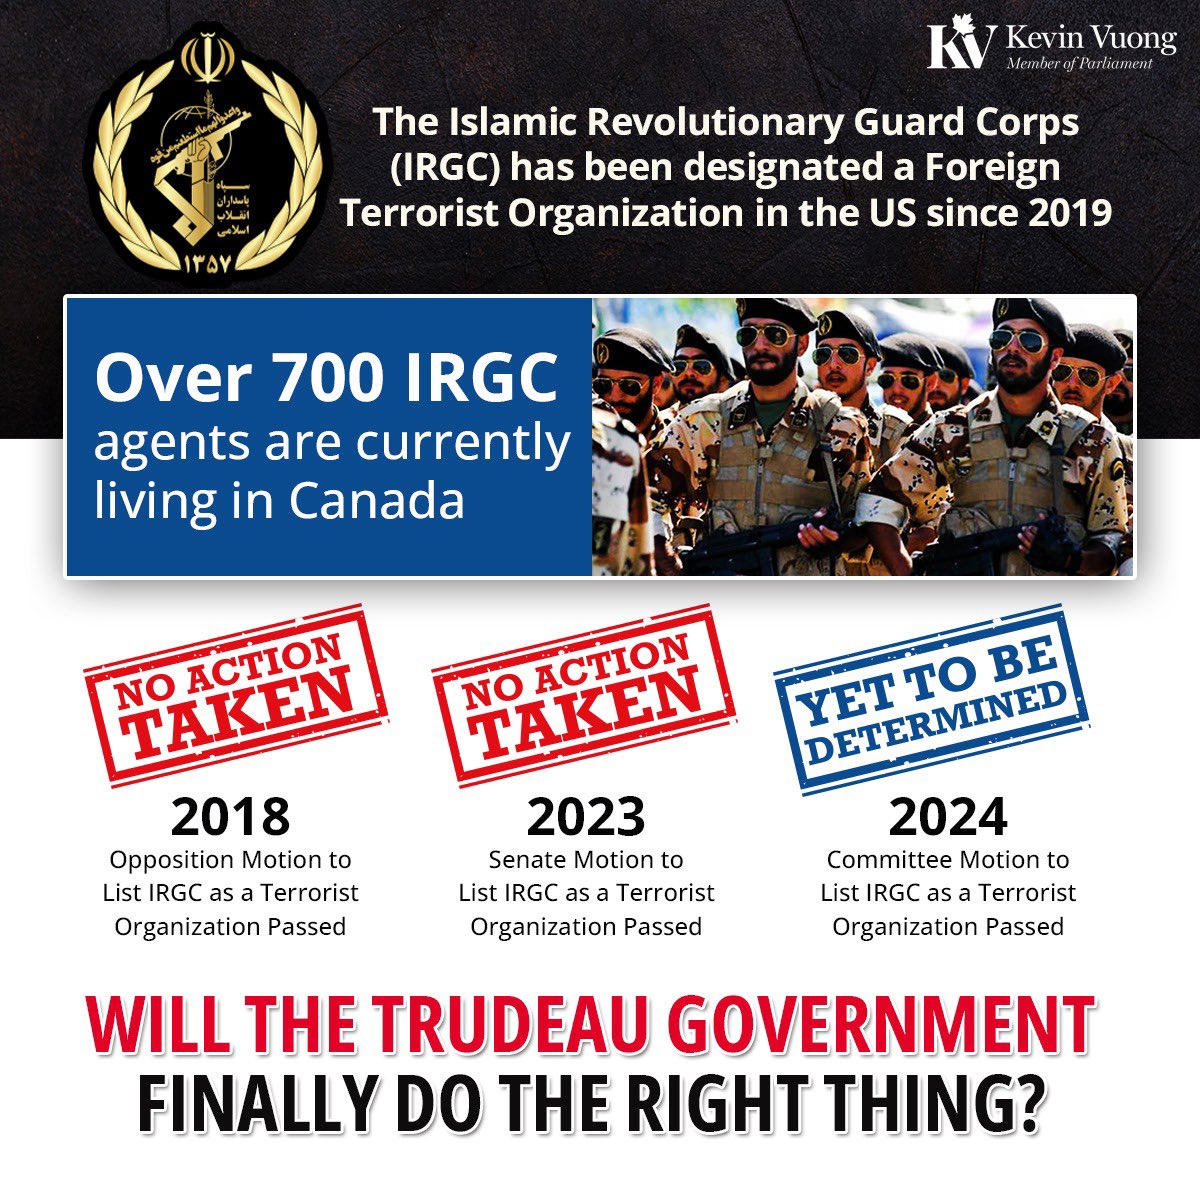 6 years of broken promises.

When will @JustinTrudeau listen to the demands of 🇨🇦’s Iranian community and list the #IRGC as the terrorists that they are?

Inaction is a choice. By choosing to do nothing, Trudeau allows the #IRGCterrorists to fundraise & operate on 🇨🇦 soil.